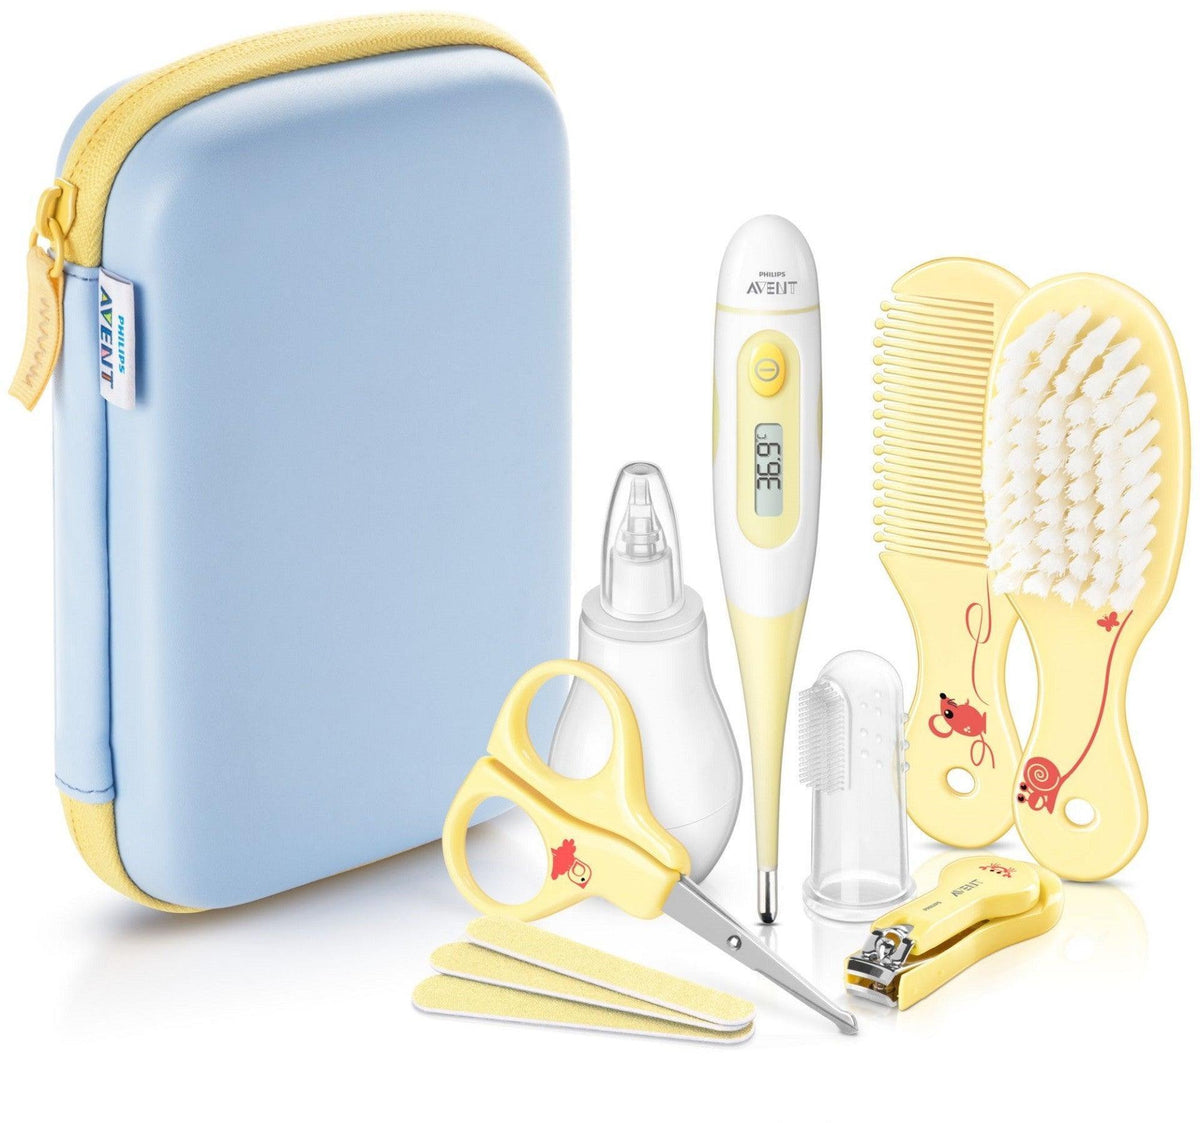 Philips Avent - SCH400/00 Philips Avent BABY CARE SET - Mari Kali Stores Cyprus